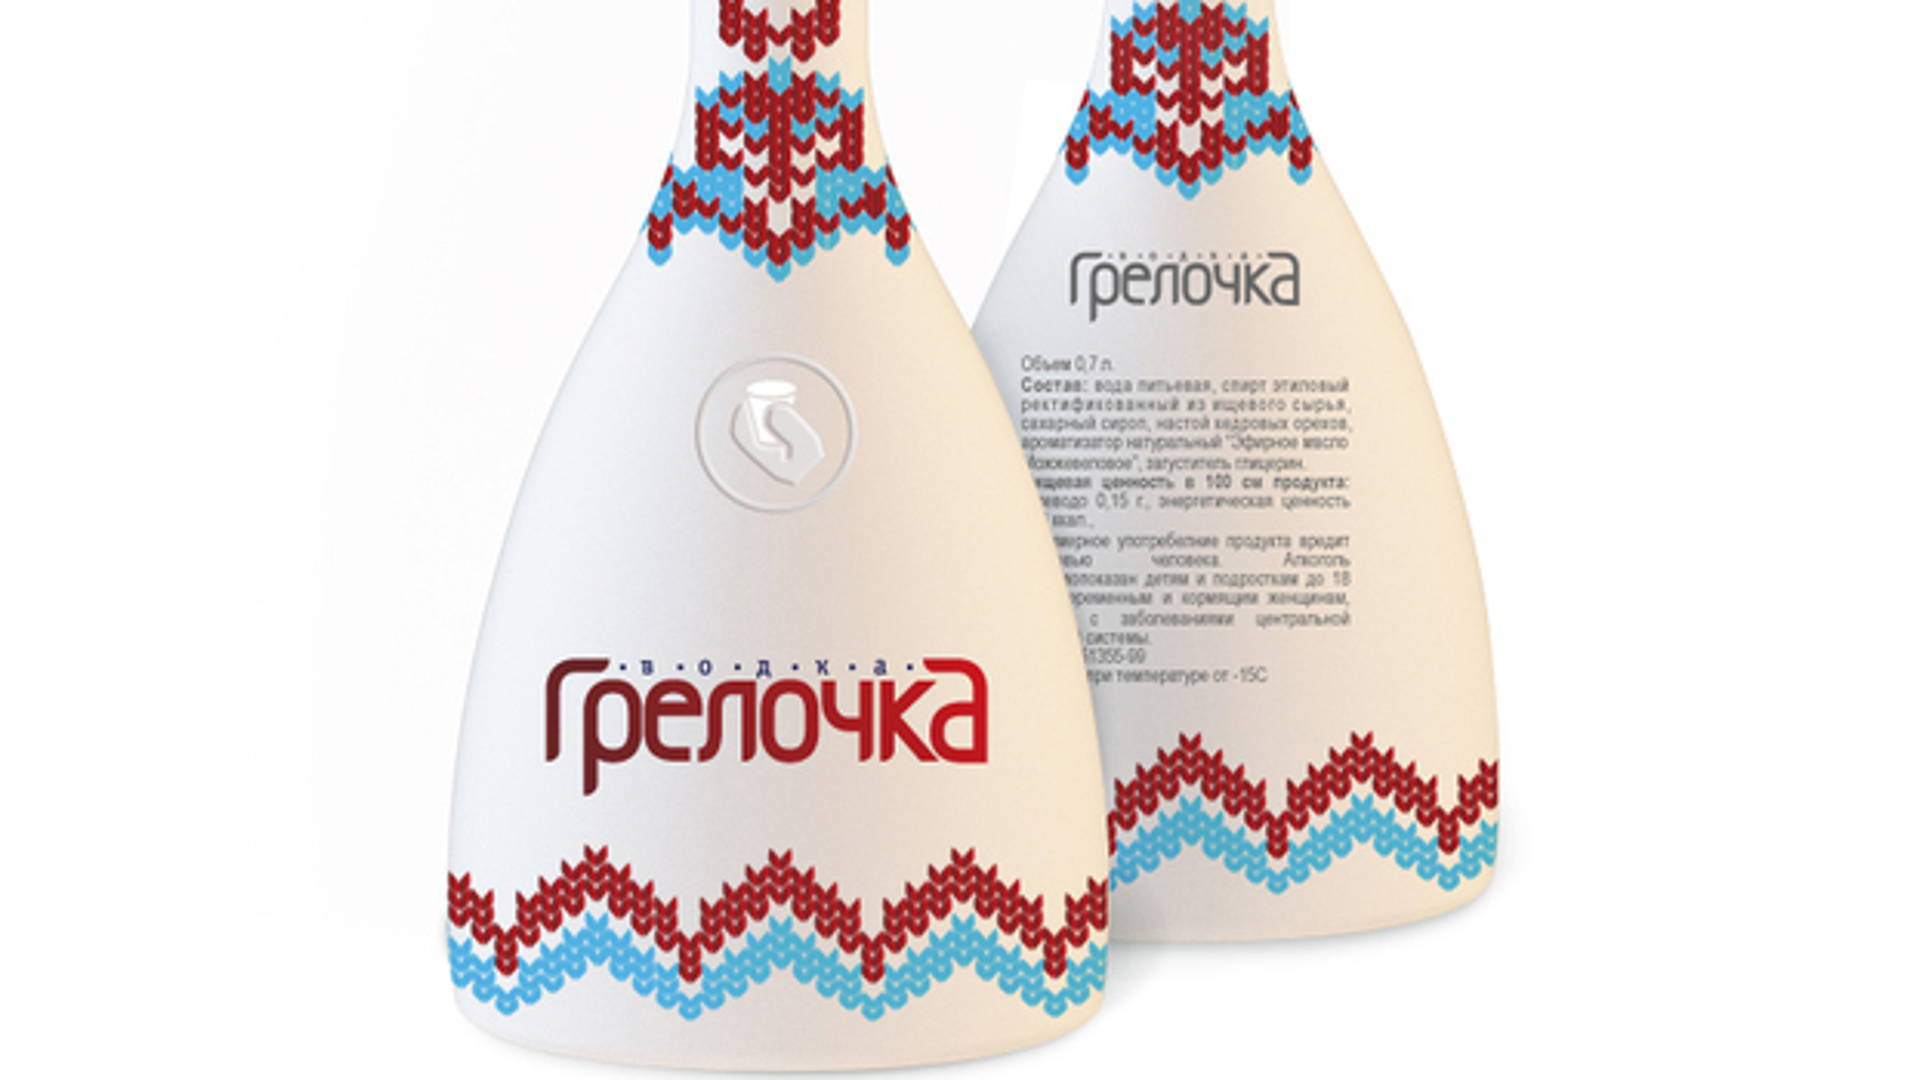 Featured image for Russian Vodka 